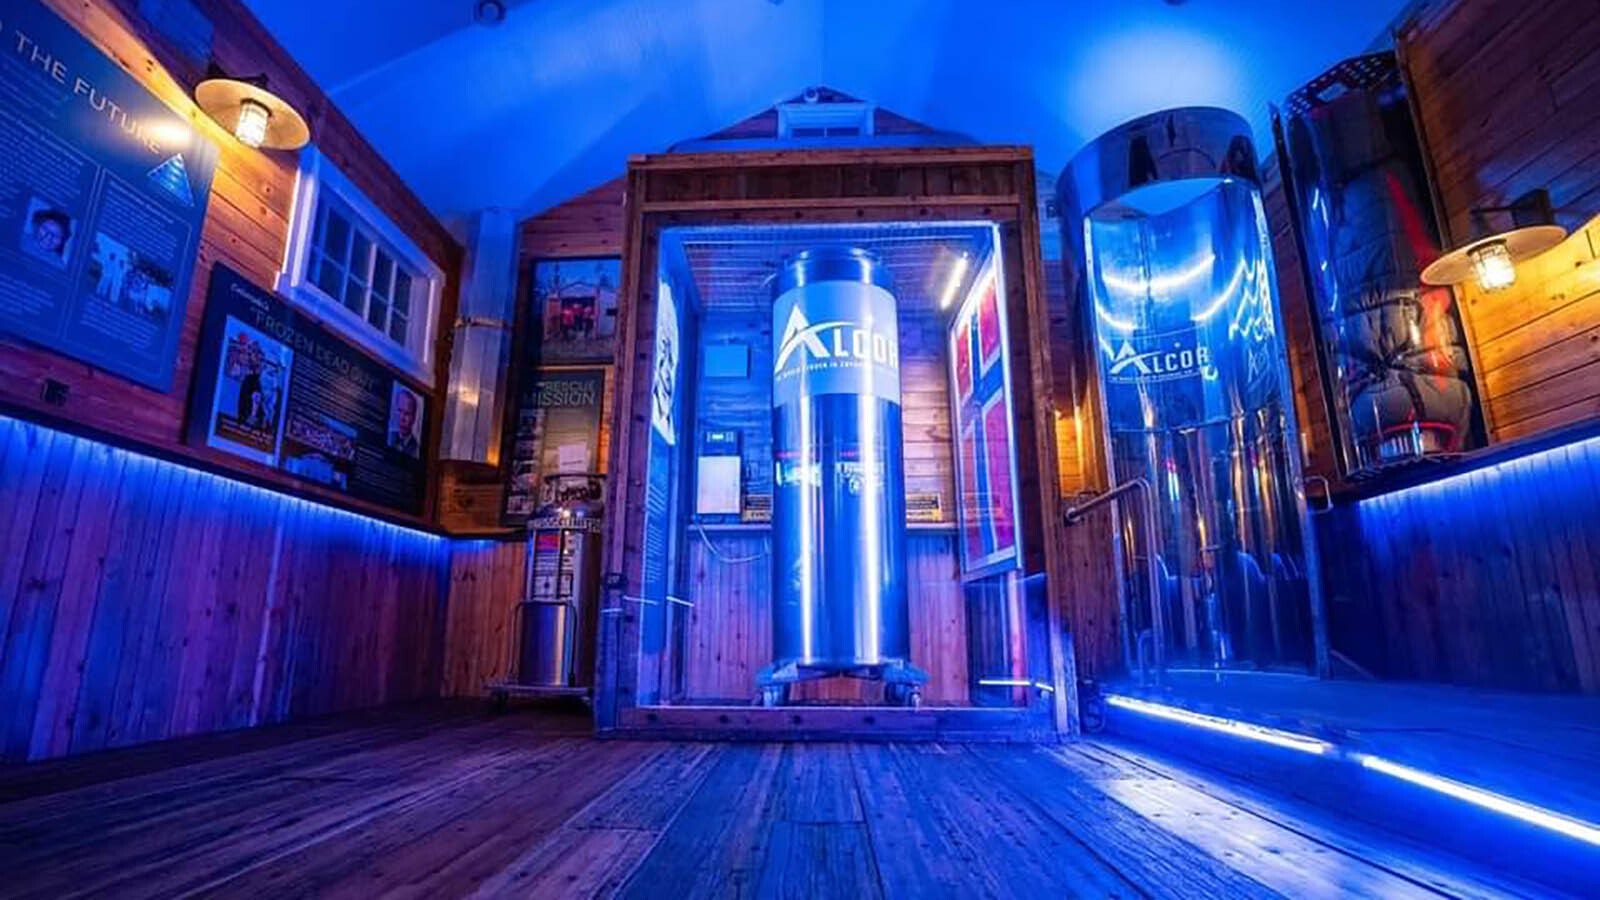 Perhaps the most famous frozen dead guy on the planet, Bredo Morstol, is the centerpiece of the new International Cryonics Museum at the famous Stanley Hotel in Estes Park, Colorado.